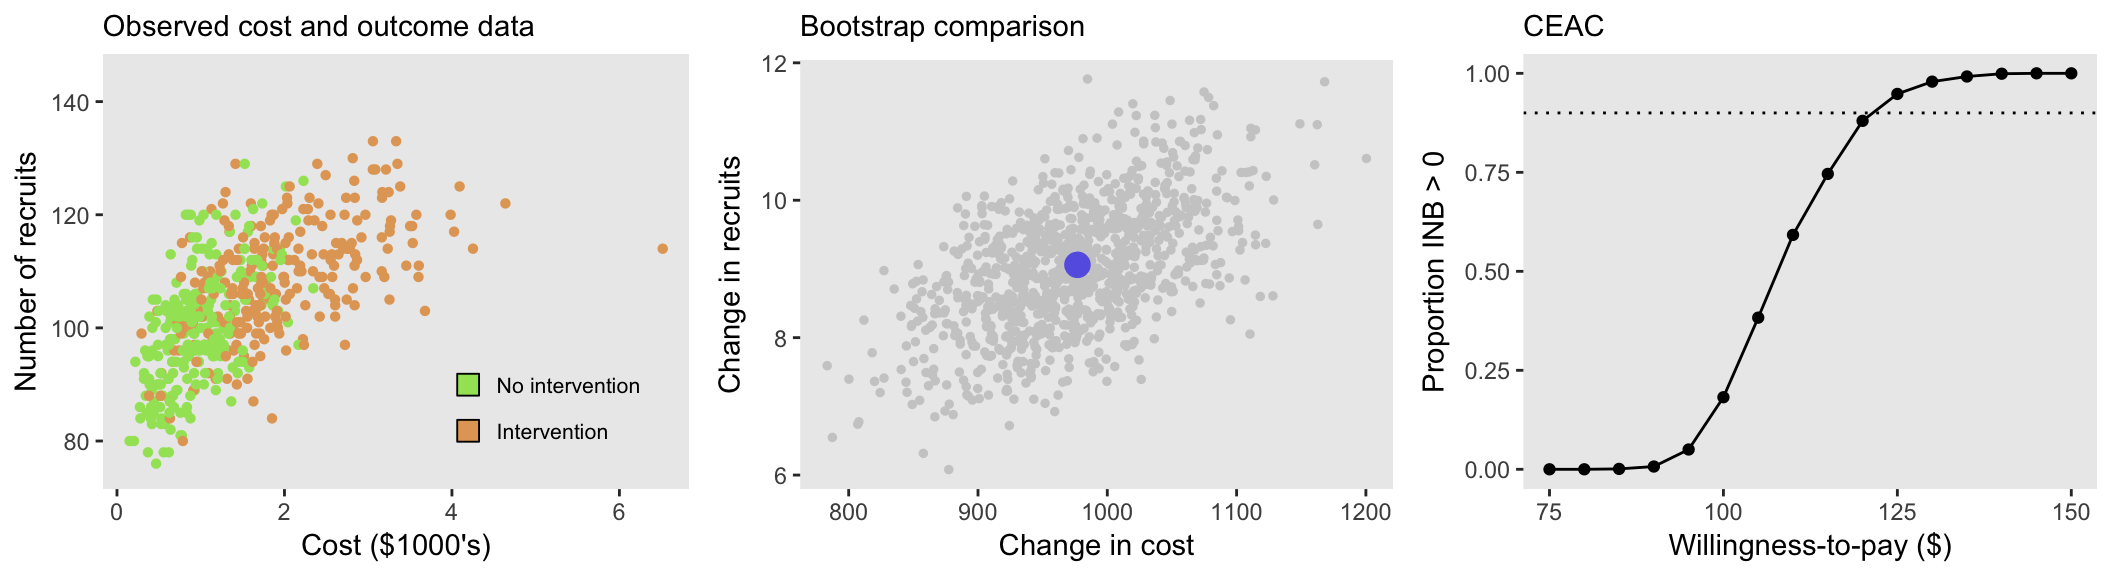 Simulating a cost-effectiveness analysis to highlight new functions for generating correlated data